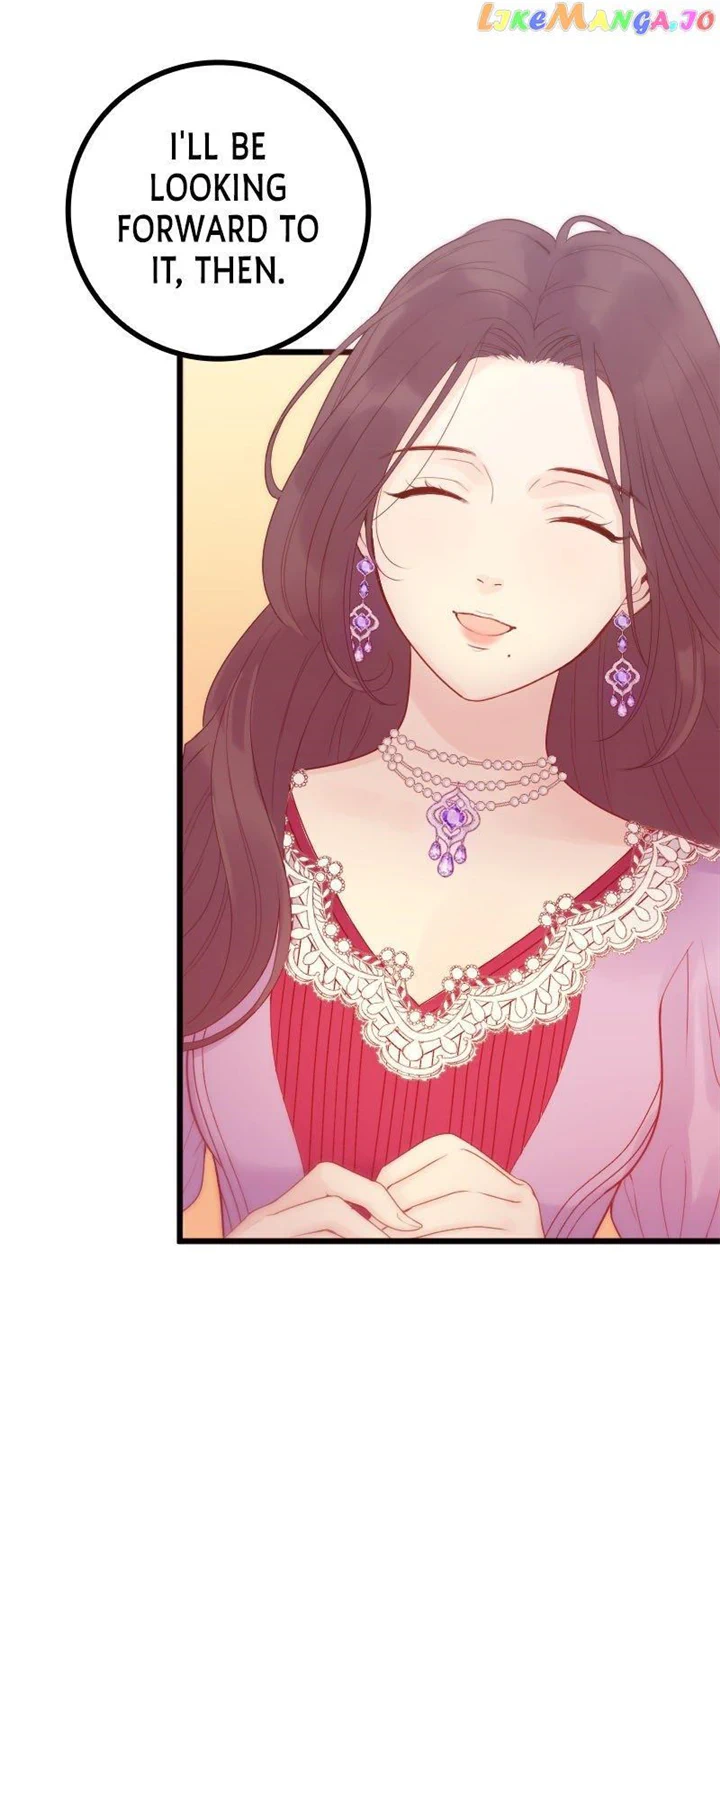 Chords of Affection: The Icy Monarch’s Love chapter 16